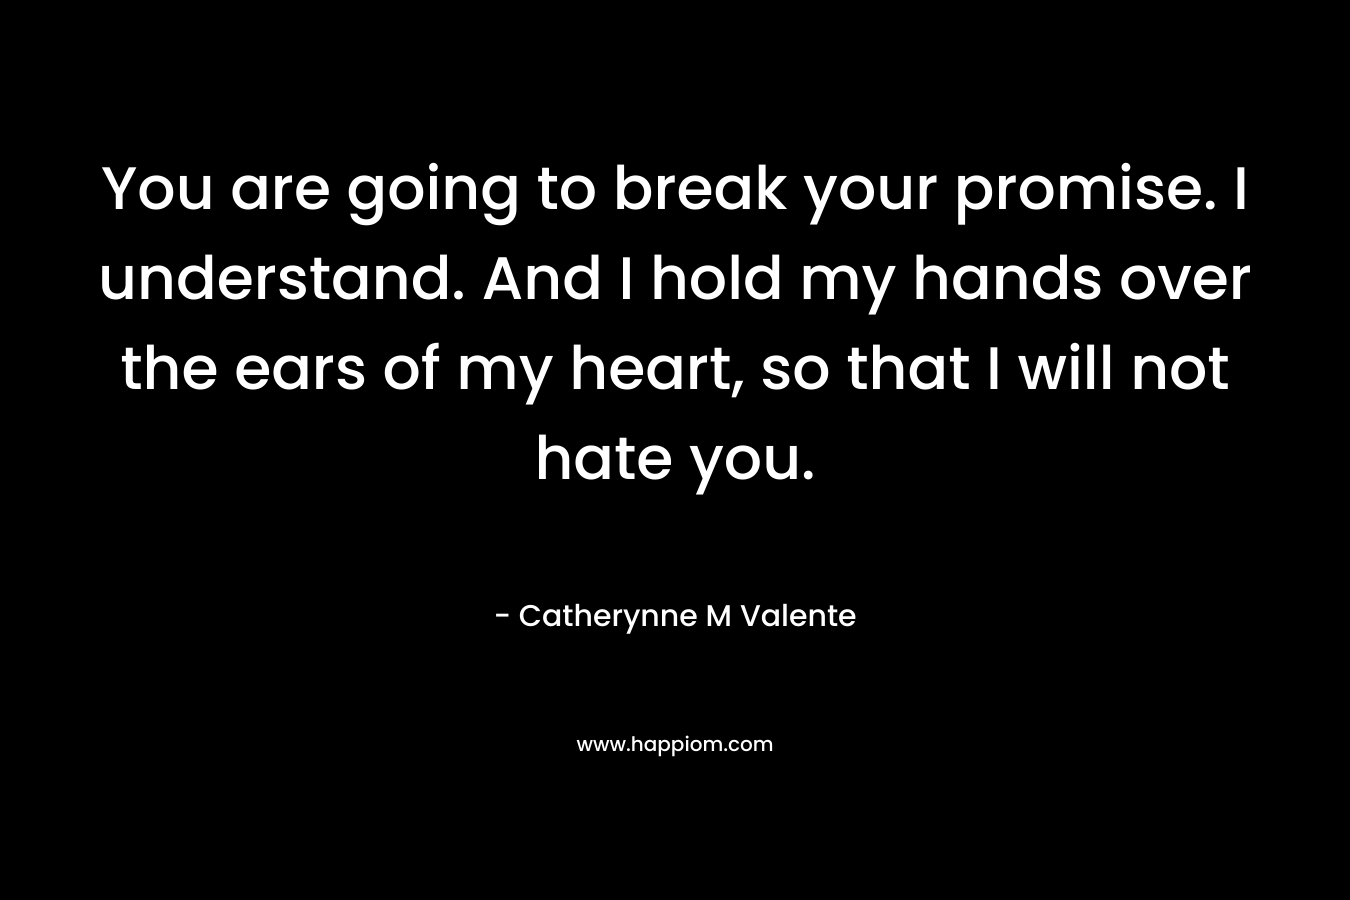 You are going to break your promise. I understand. And I hold my hands over the ears of my heart, so that I will not hate you. – Catherynne M Valente